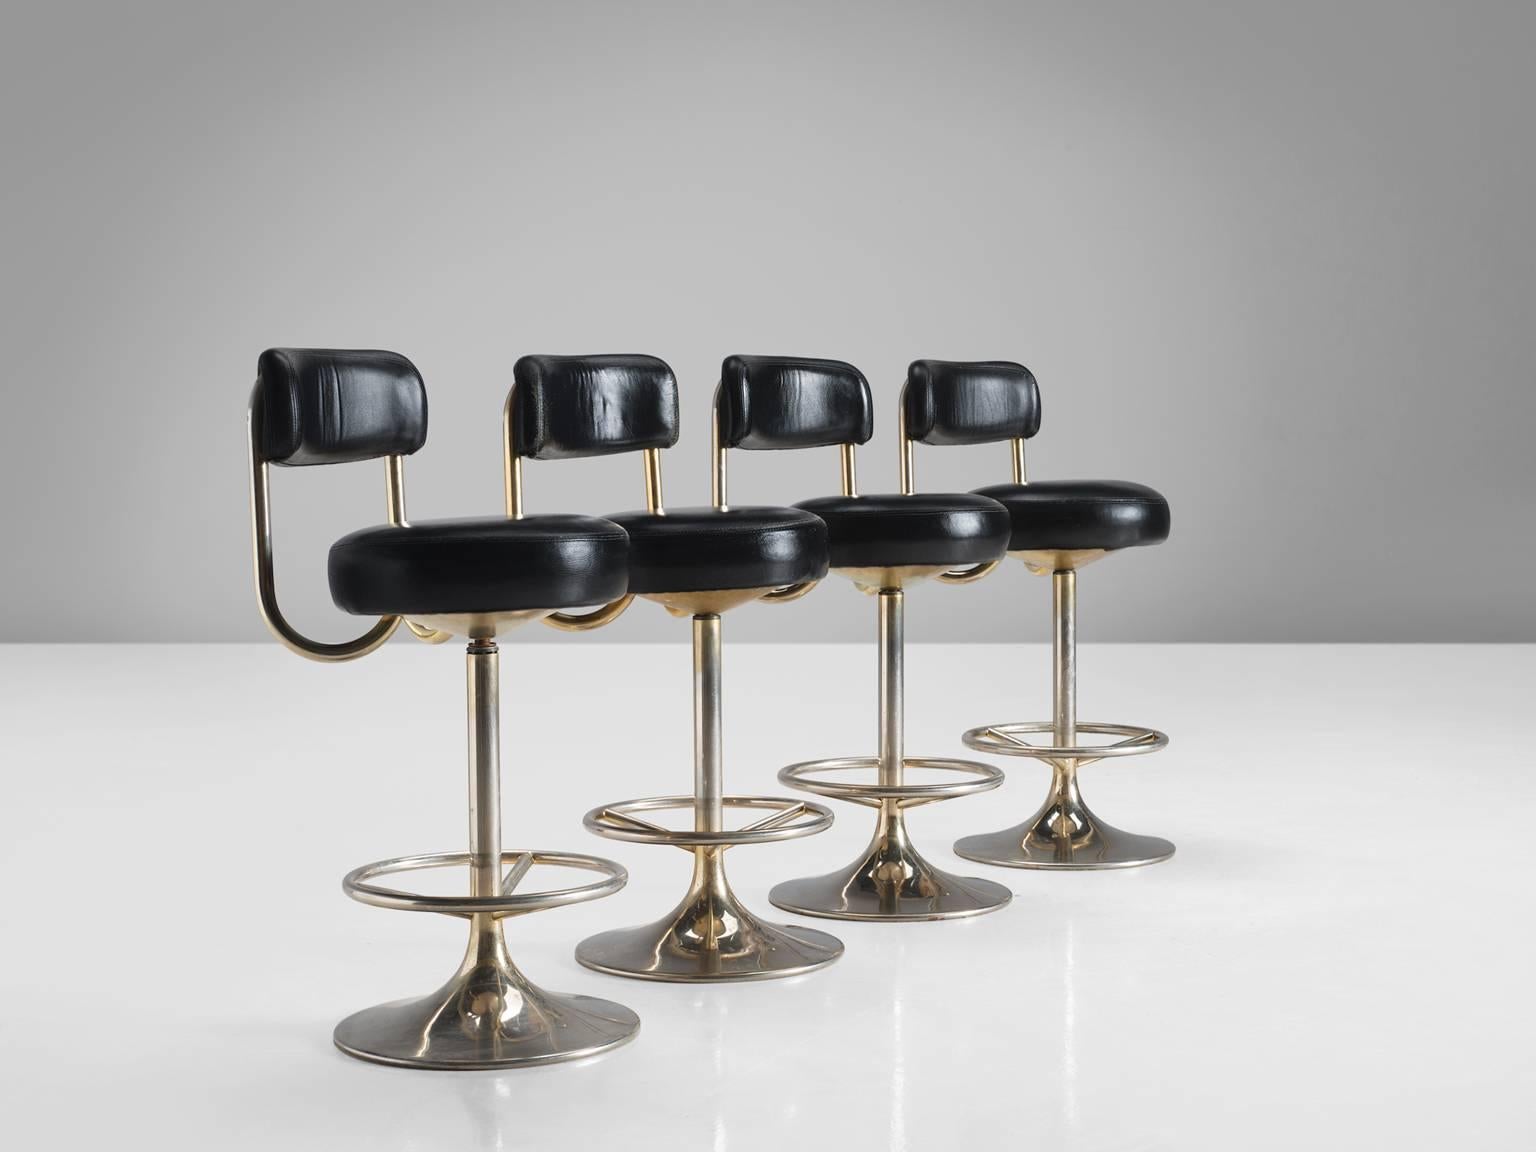 Borje Johanson for Johanson Design
Set of 8 barstools as part of 'Johanson Jupiter Collection'
Upholstered by us in black leather as selected by you.